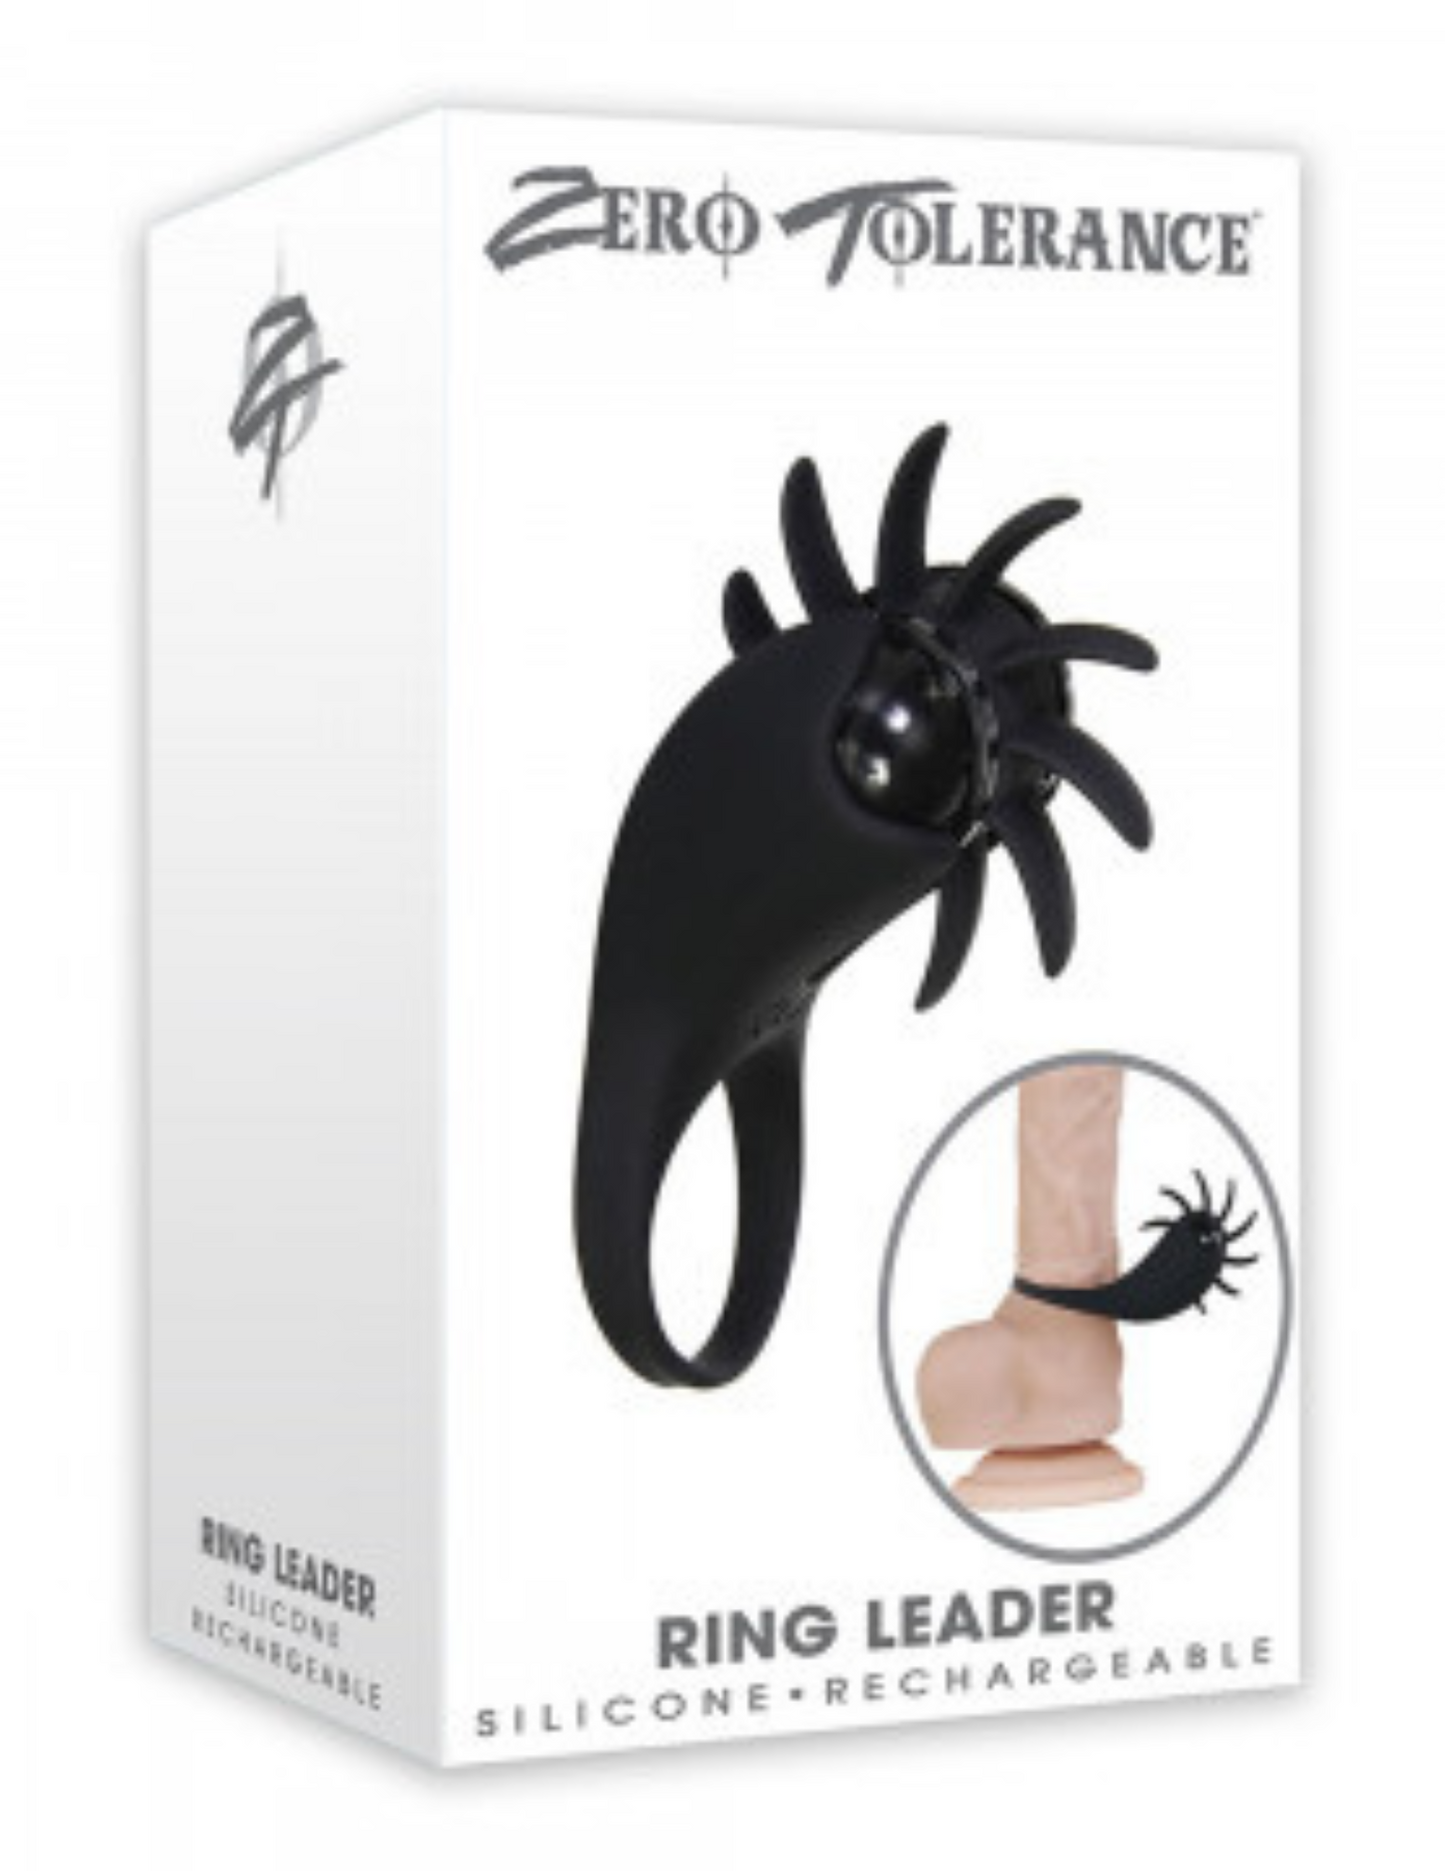 Zero Tolerance - Ring Leader Rechargeable Vibrating Spinning Cock Ring - Black